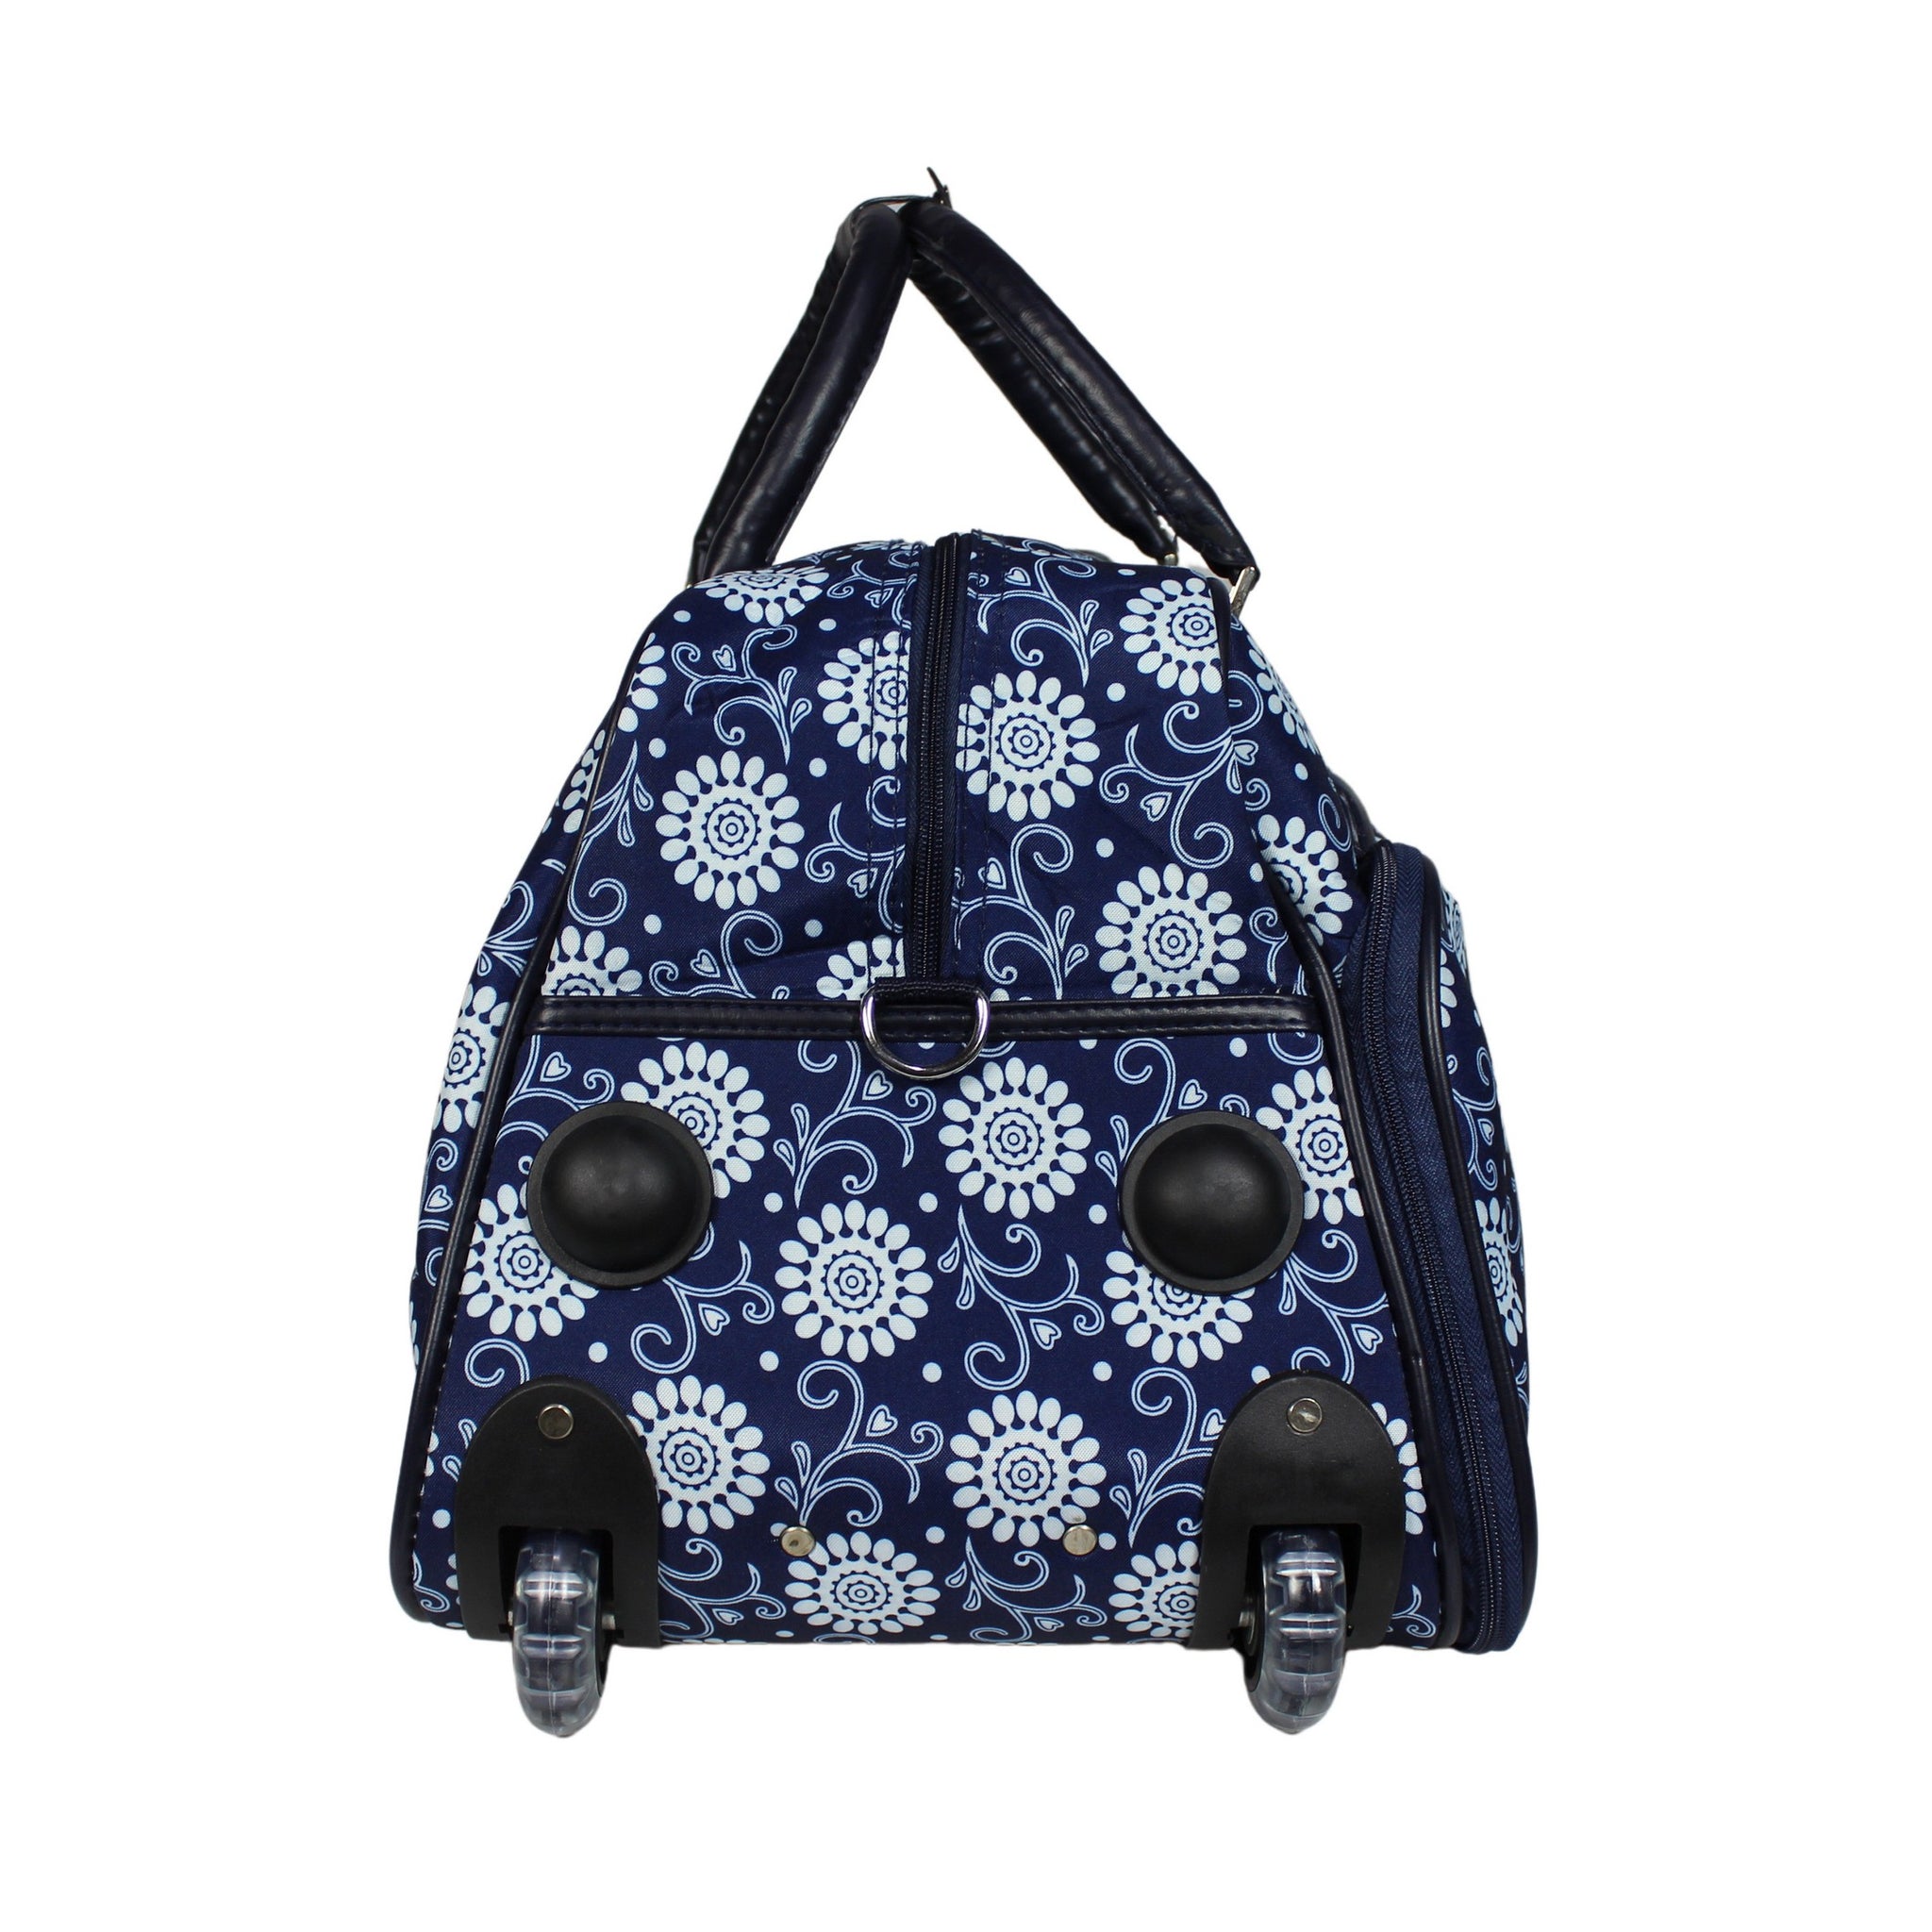 CalBags Floral 21" Rolling Carry-On Duffel Bags